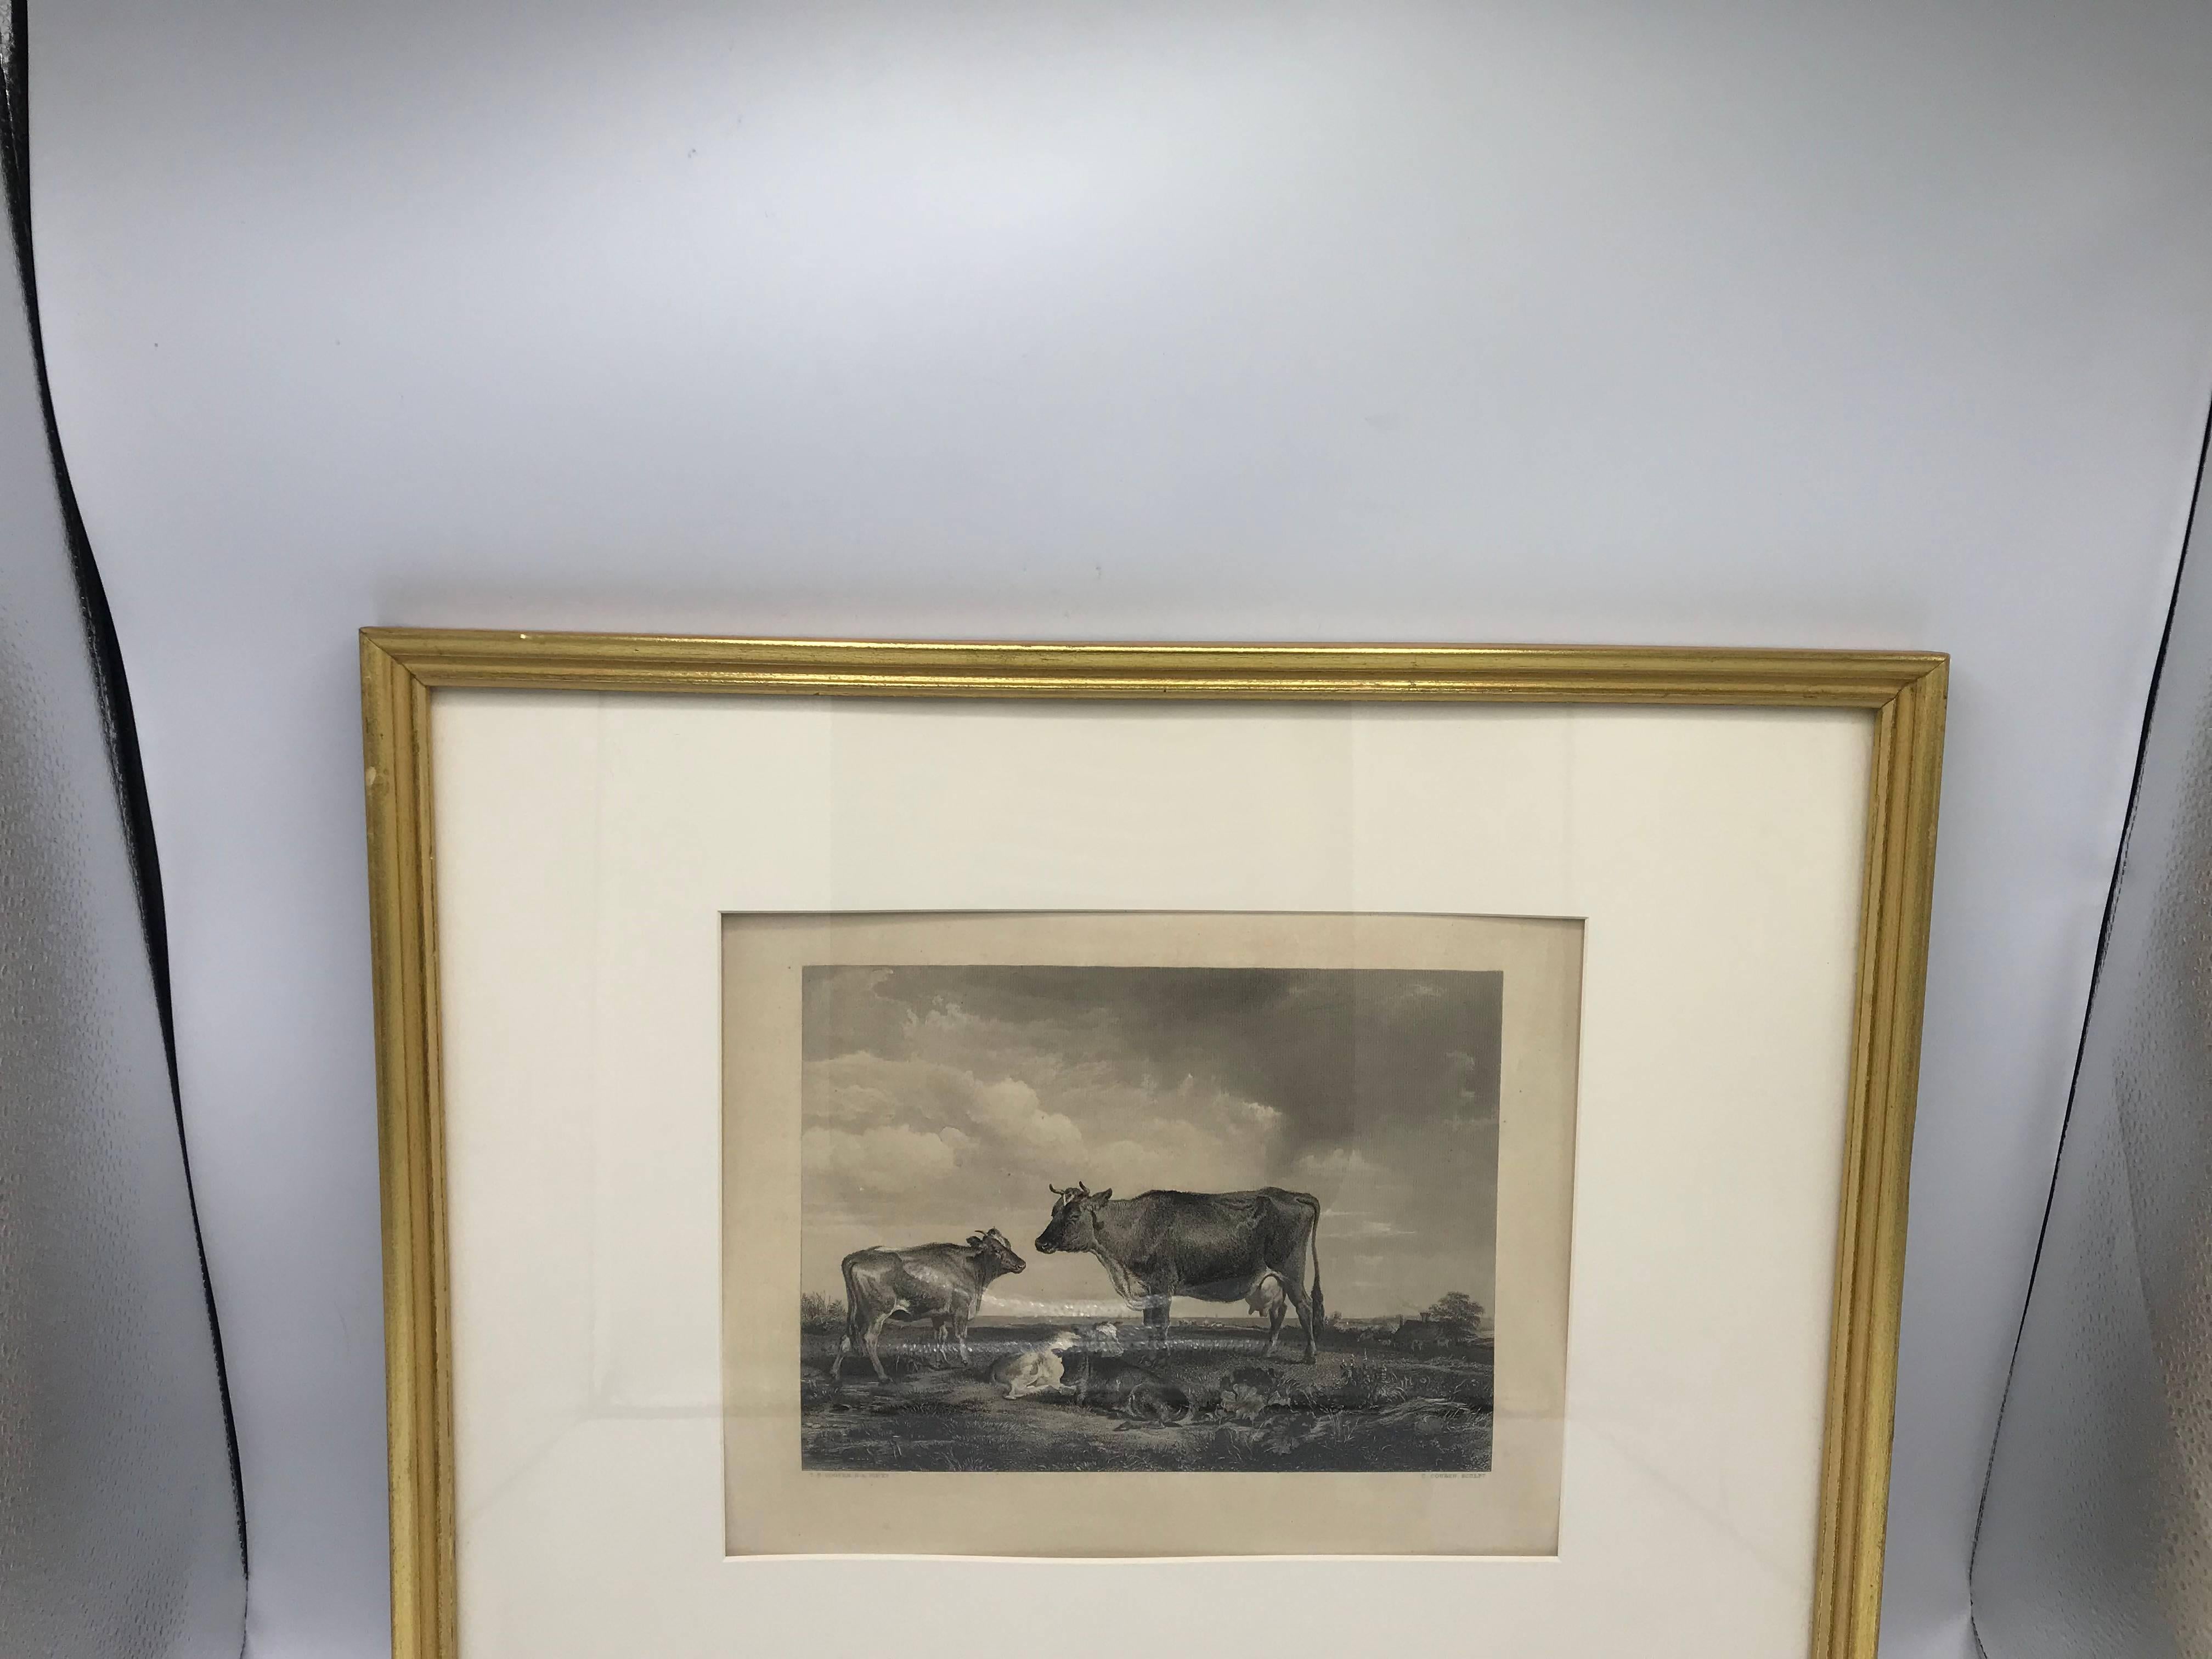 Offered is a stunning black and white print of a countryside scene with four cows. Framed. Print measures 12